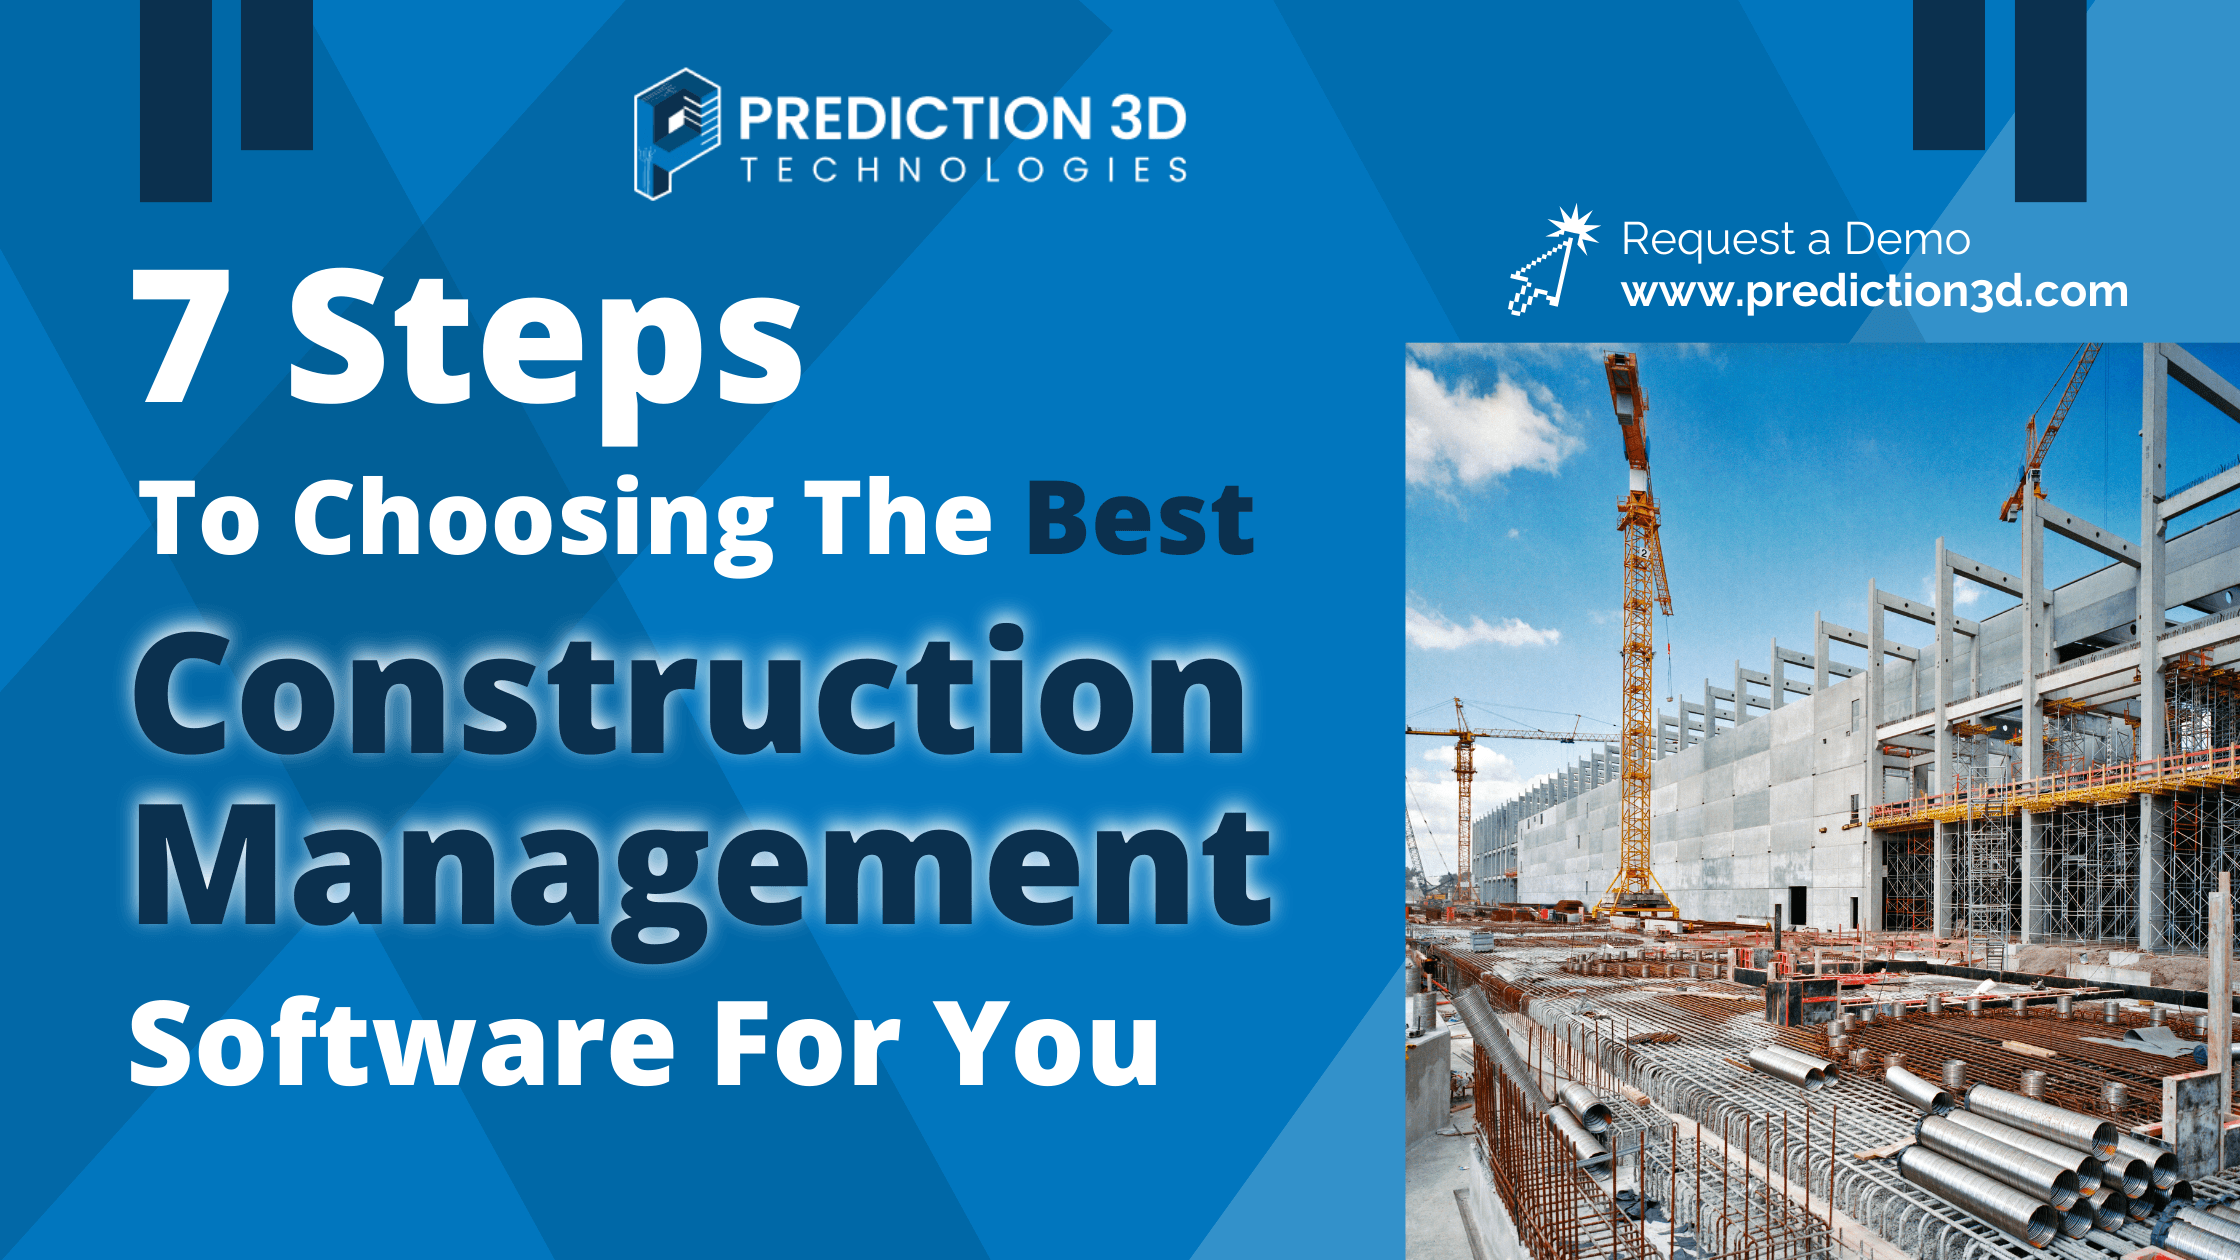 7 steps to choosing the best construction management software for you